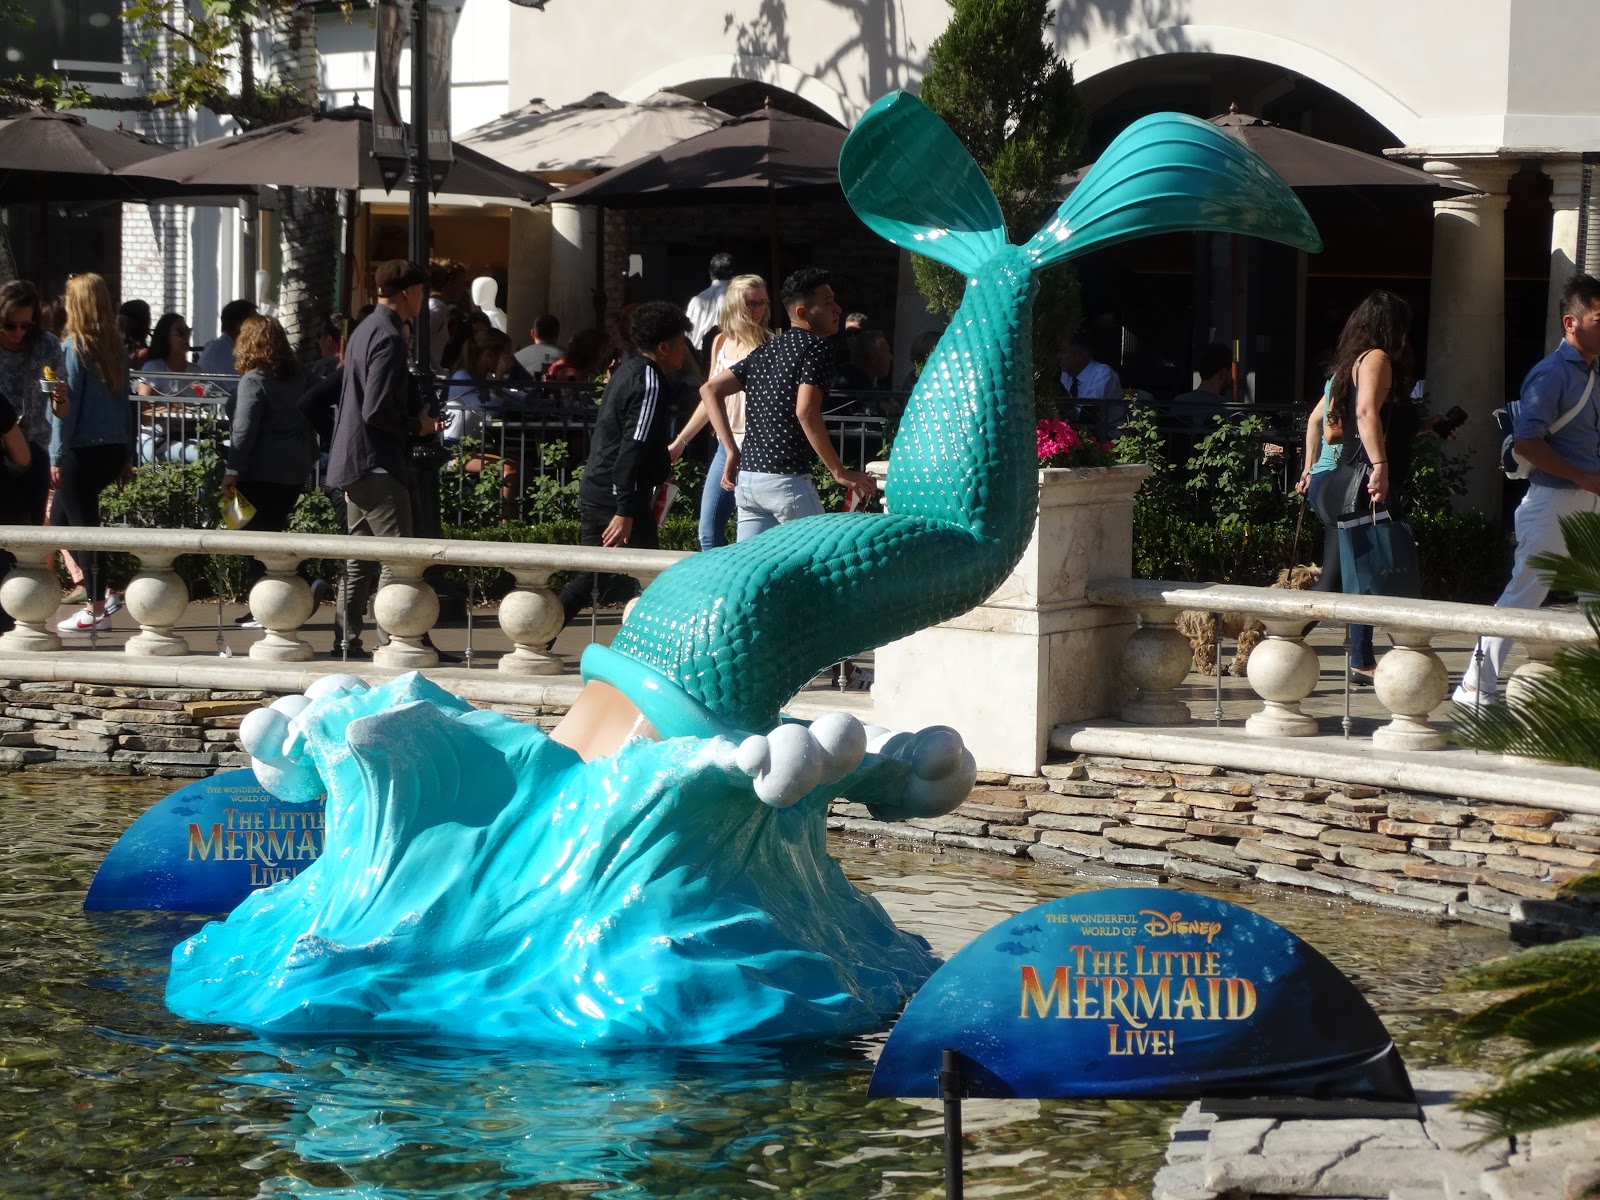 Video / Photos: "The Little Mermaid LIVE" Gets Immersive Promotional